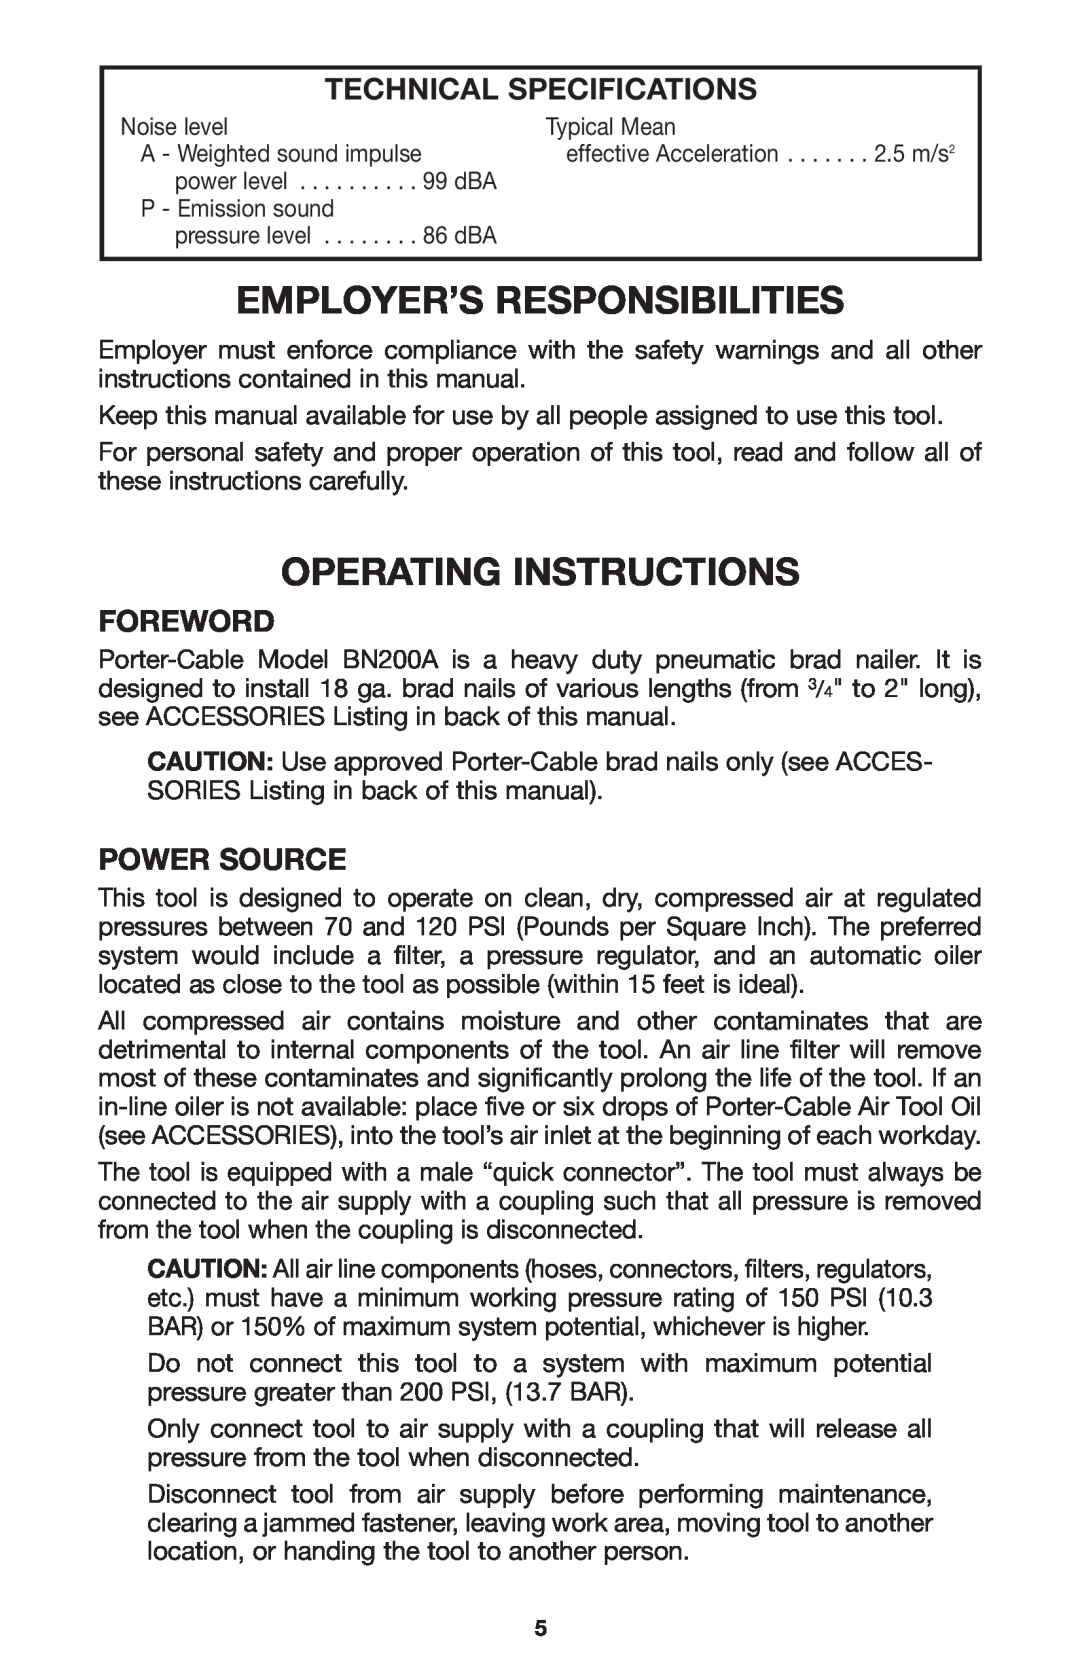 Porter-Cable BN200A Employer’S Responsibilities, Operating Instructions, Technical Specifications, Foreword, Power Source 